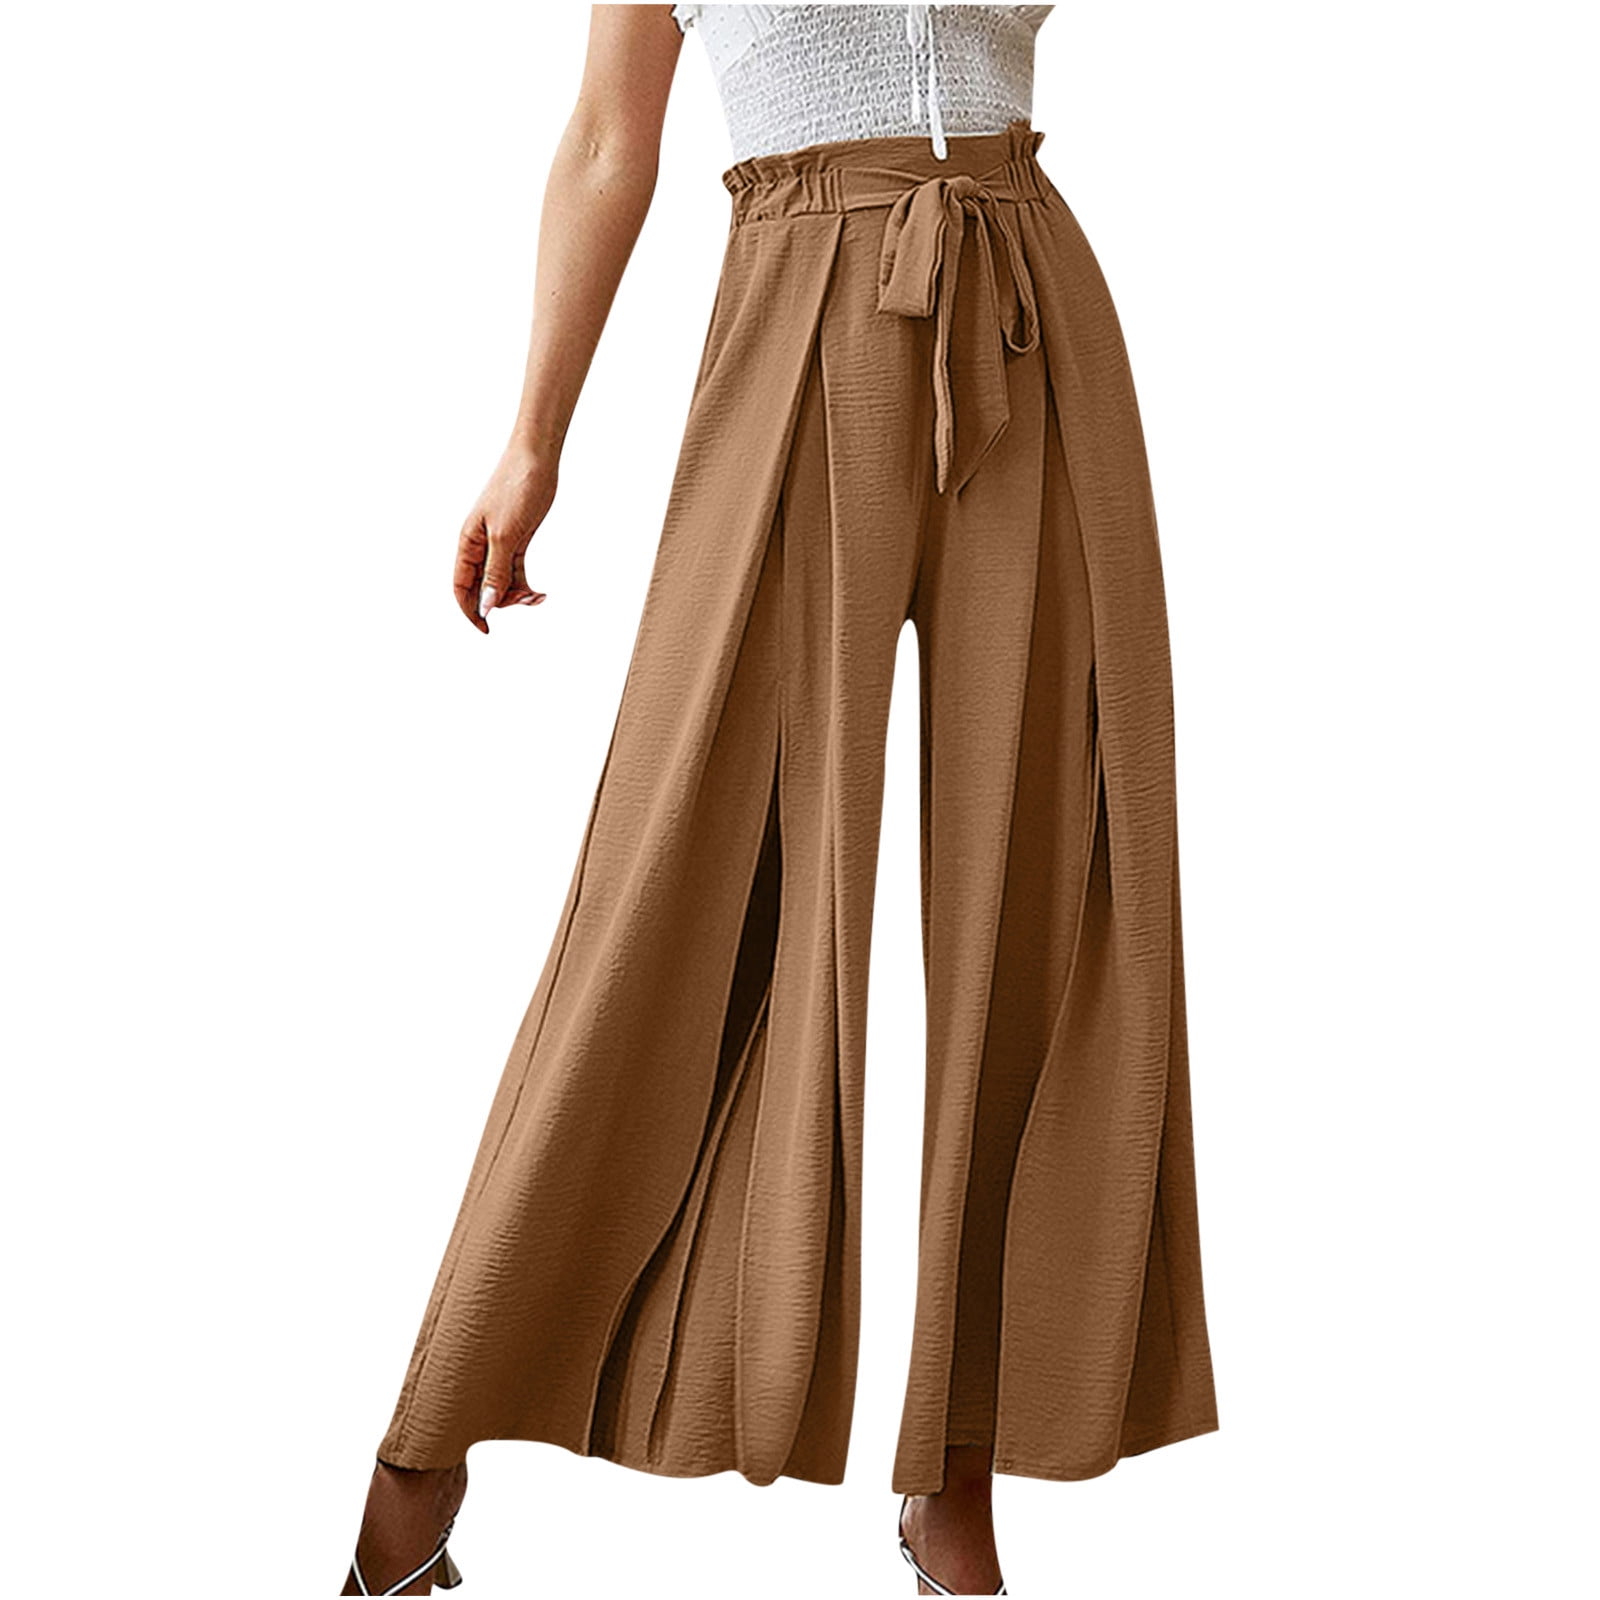 RYRJJ Women's Palazzo Wide Leg Pants Bow Knot Front High Waist Side Slit  Flowy Pleated Pant Casual Work Dress Trousers with Belt(Brown,S) 